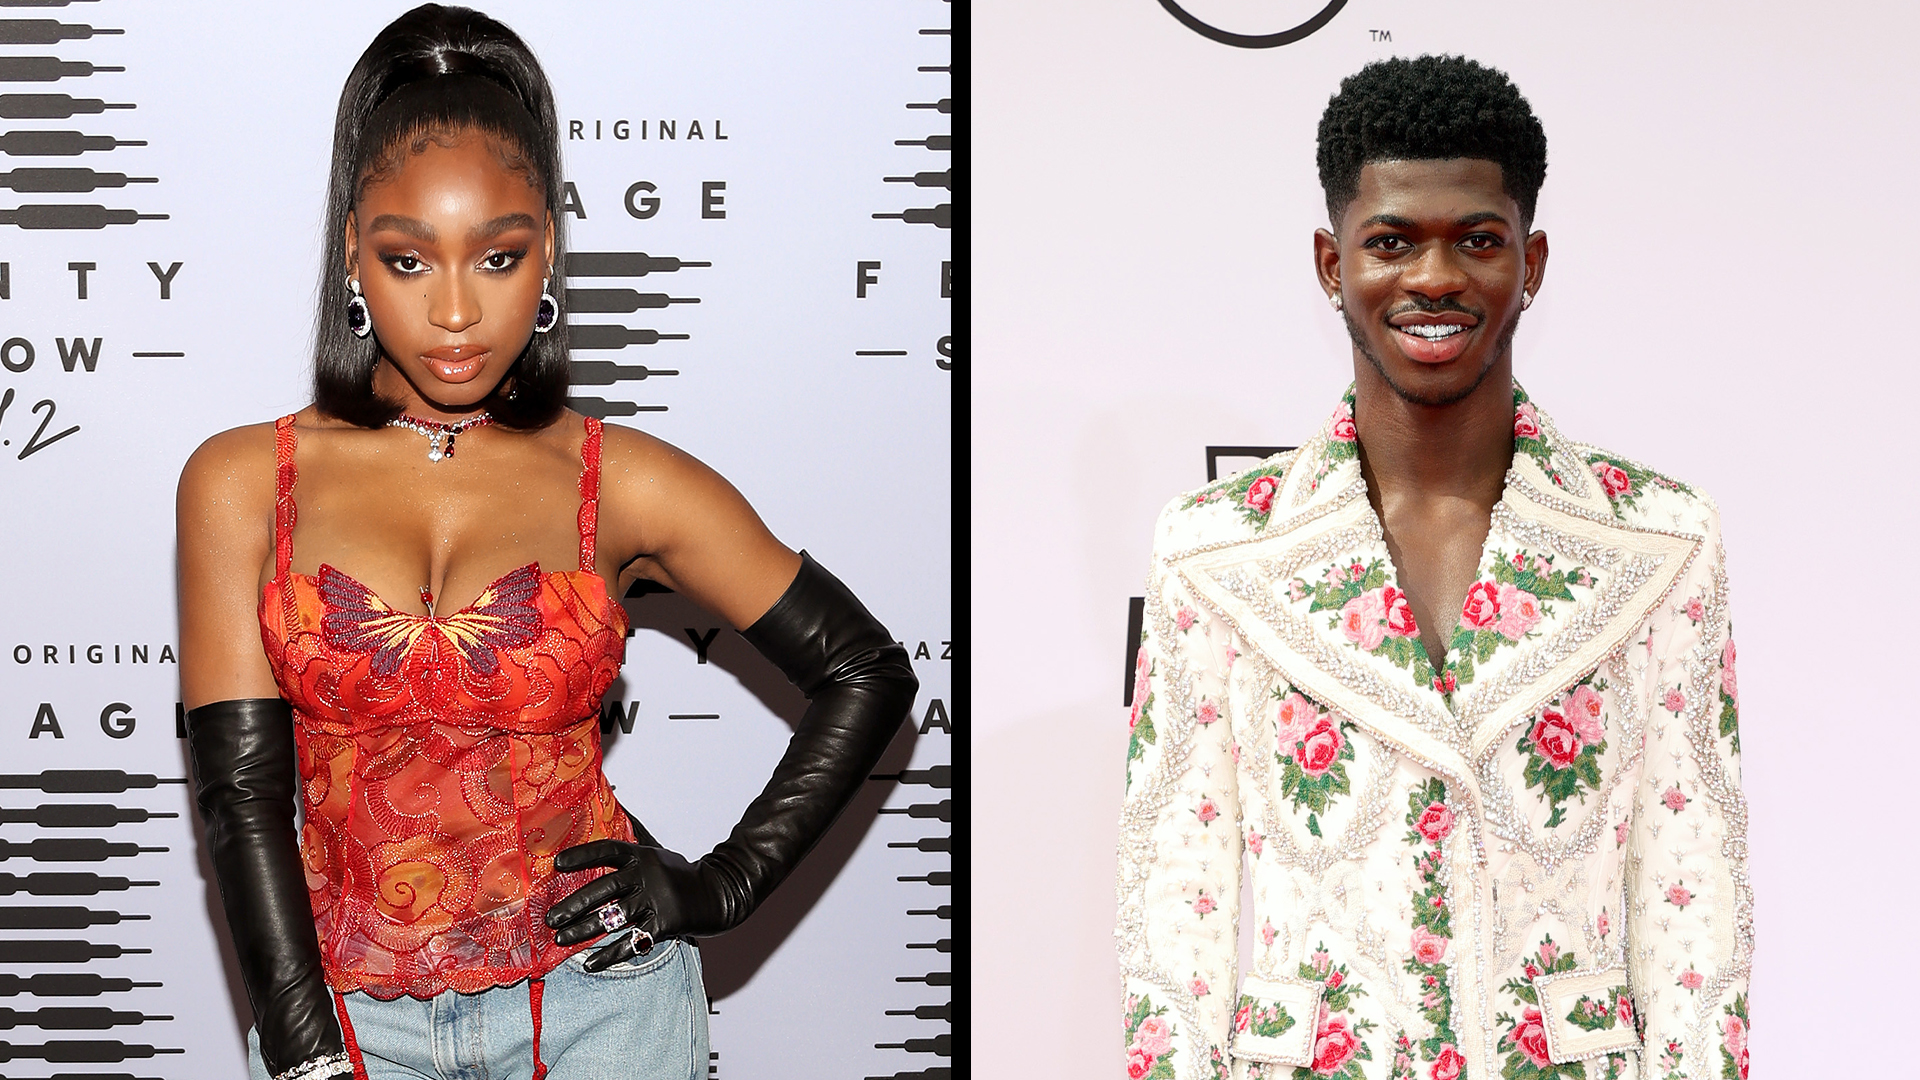 TikTok Makes Its Radio Debut On SiriusXM With The Help Of Normani, Lil Nas X And More